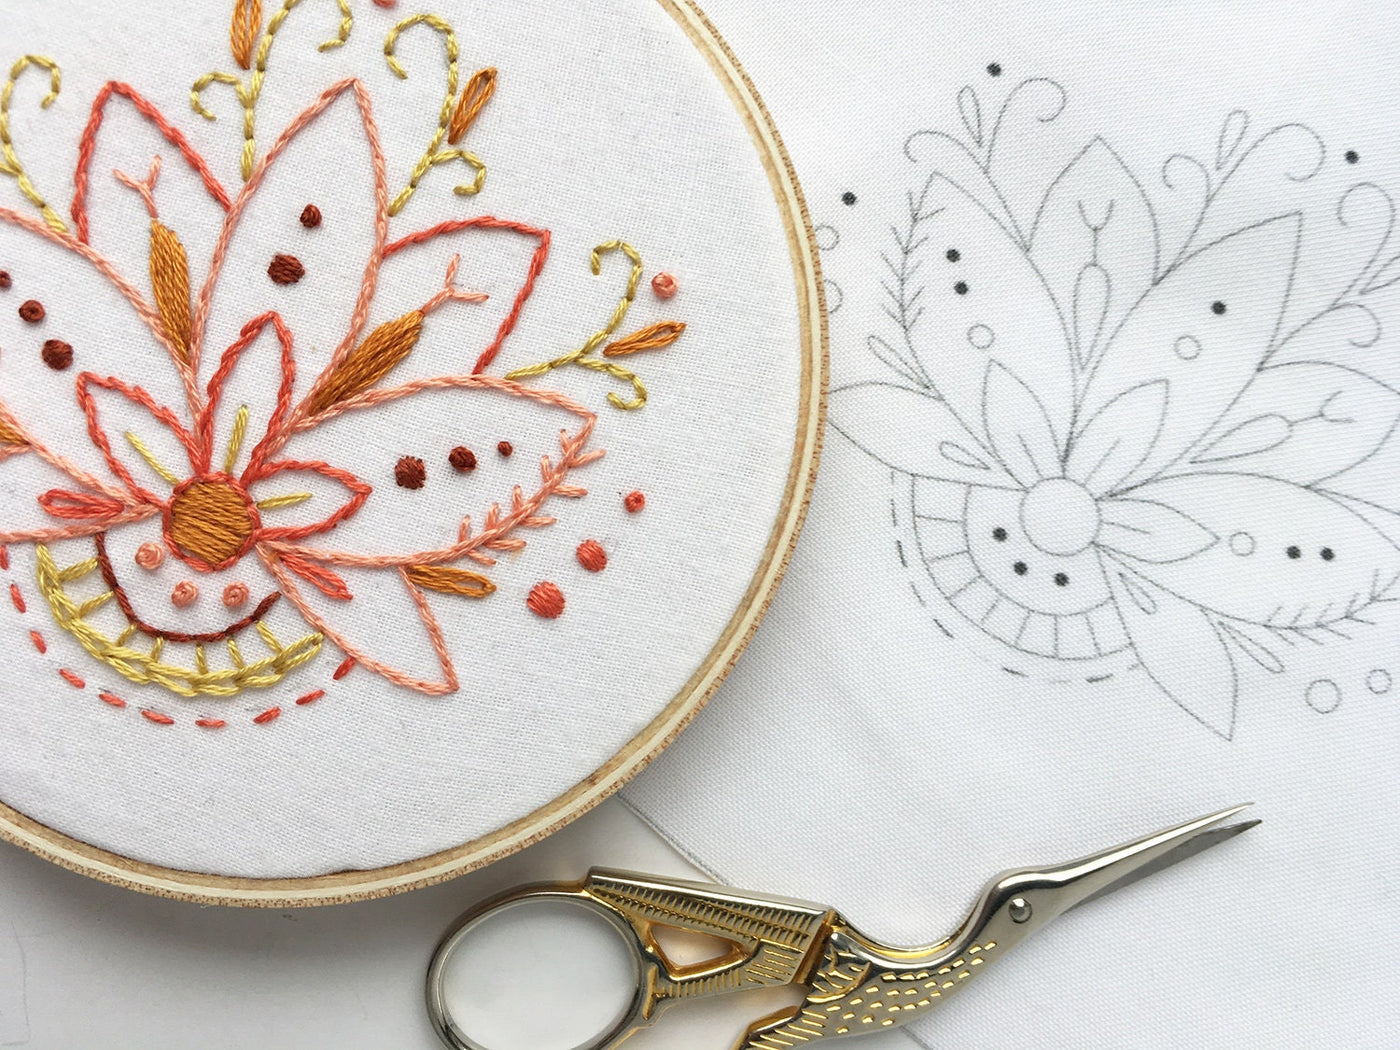 Mini Lotus Flower Hand Embroidery pattern download